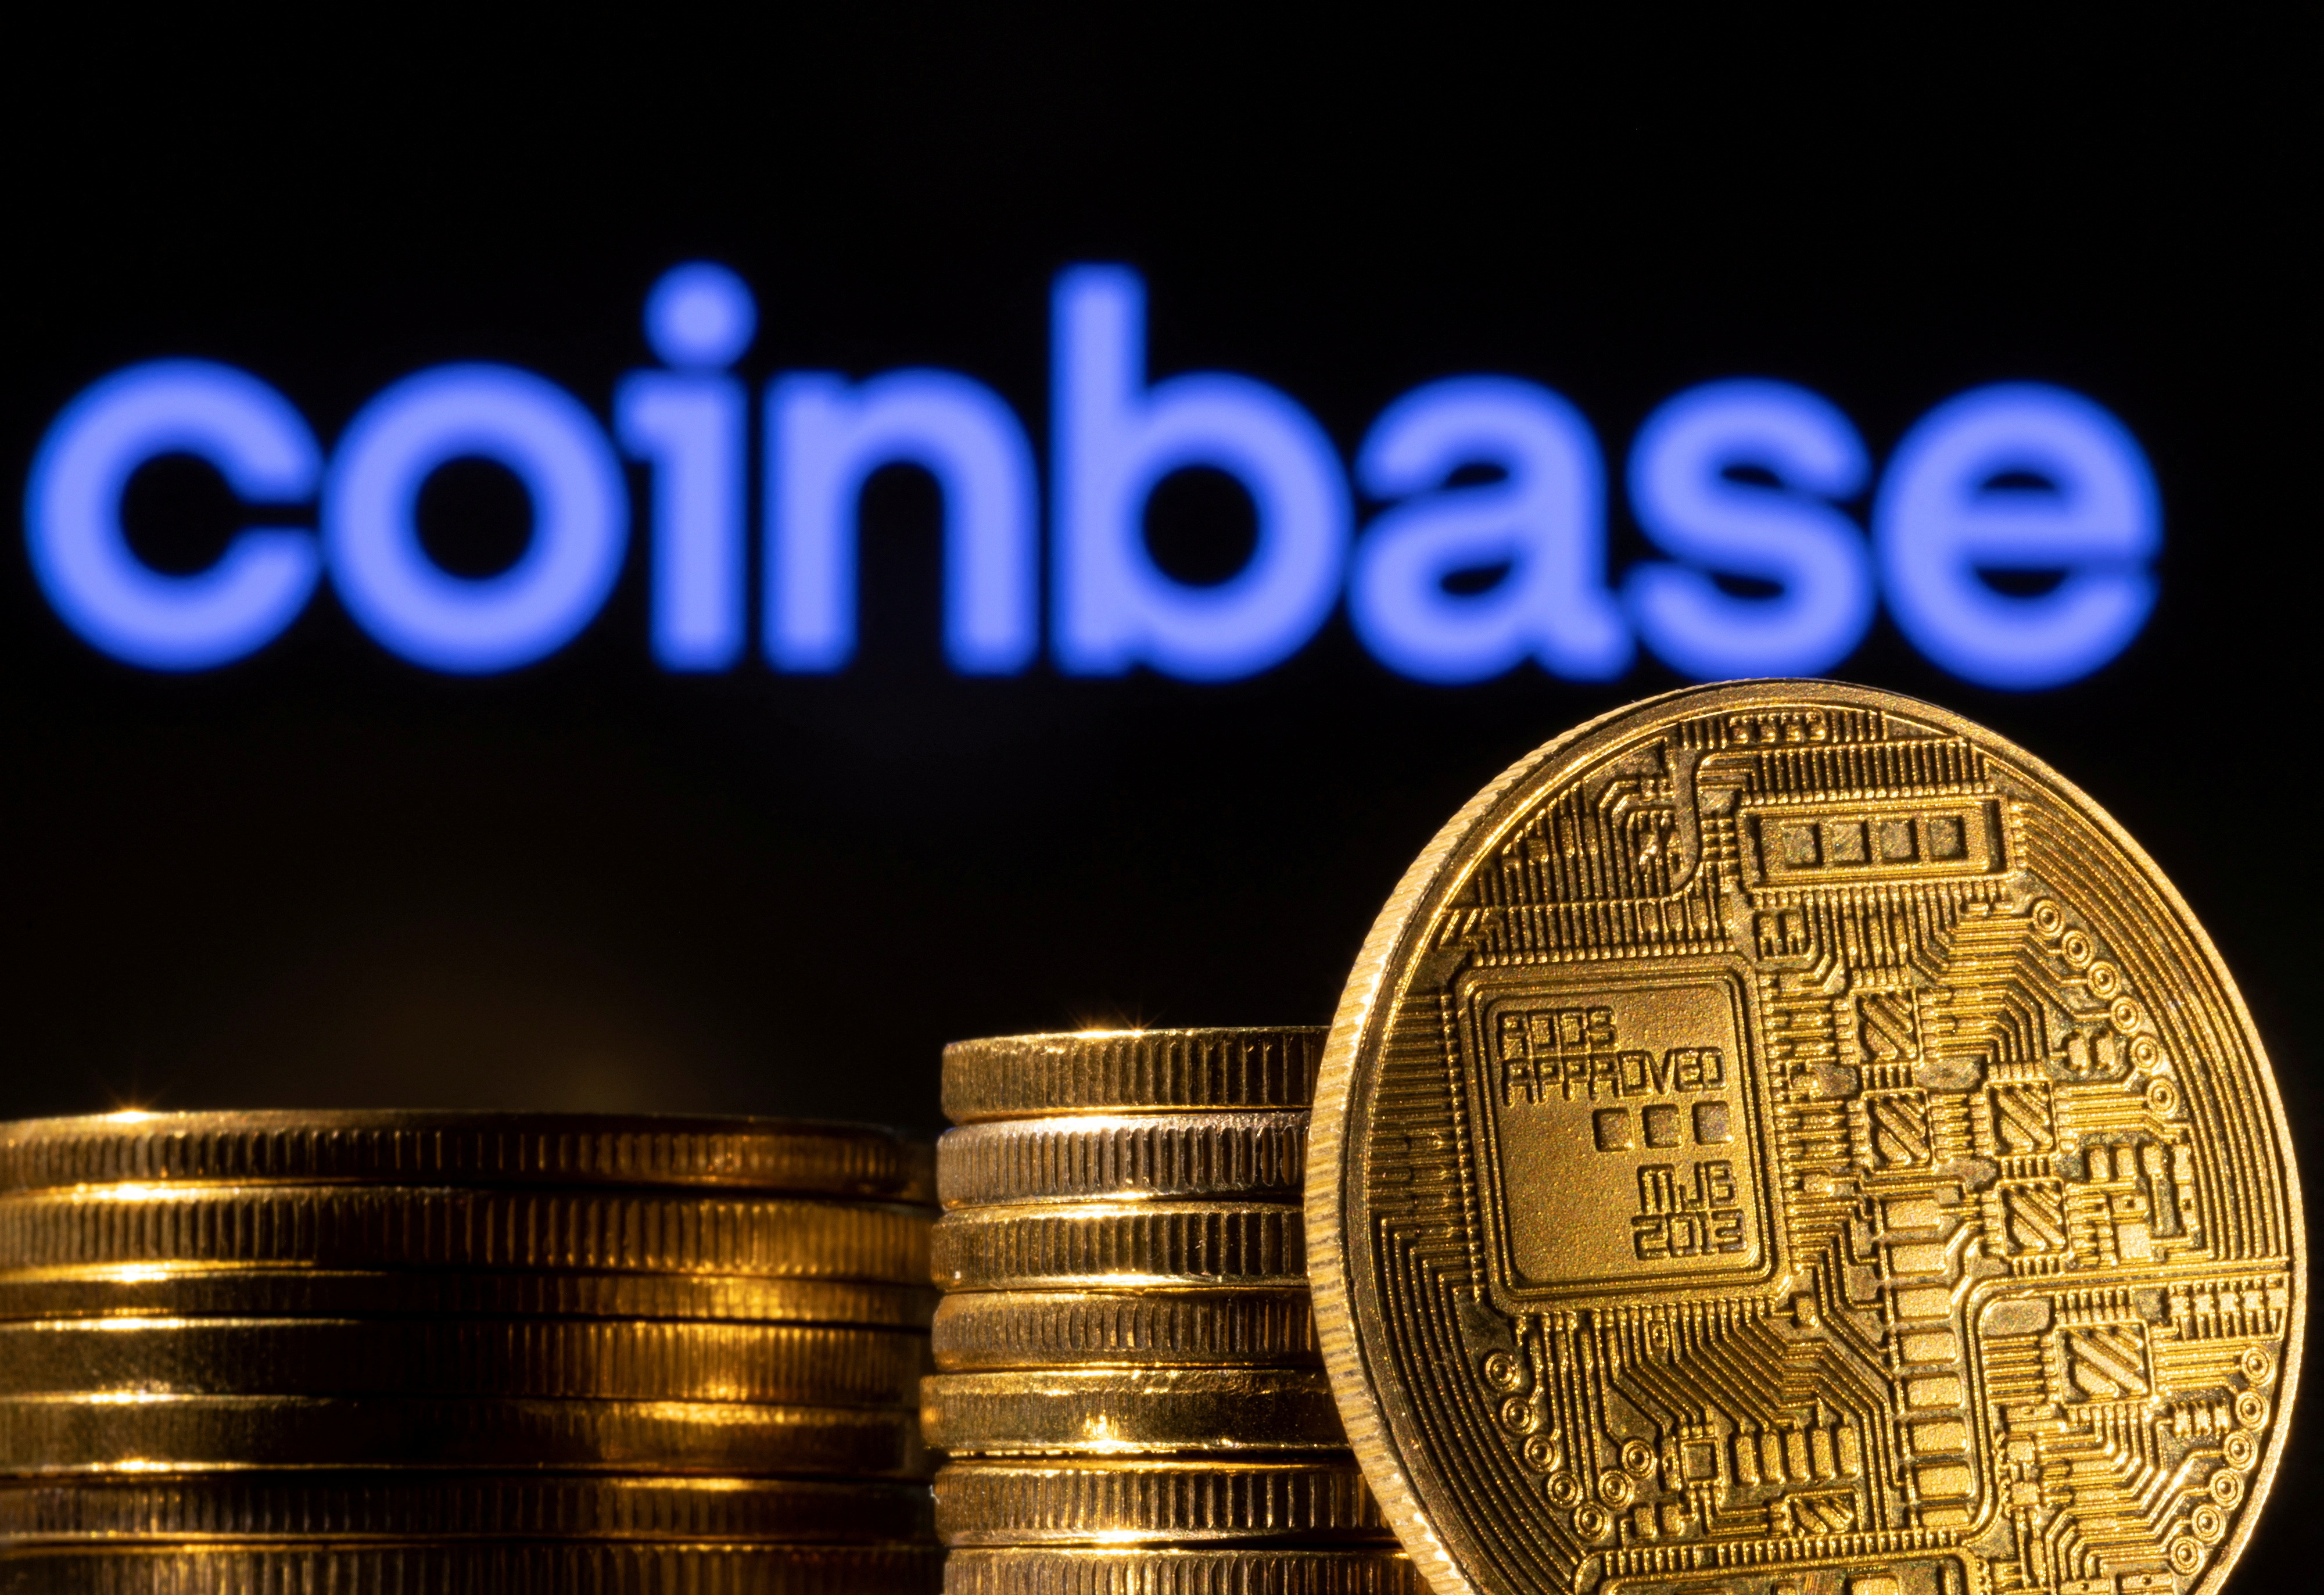 The illustration shows a representation of the cryptocurrency and the Coinbase logo